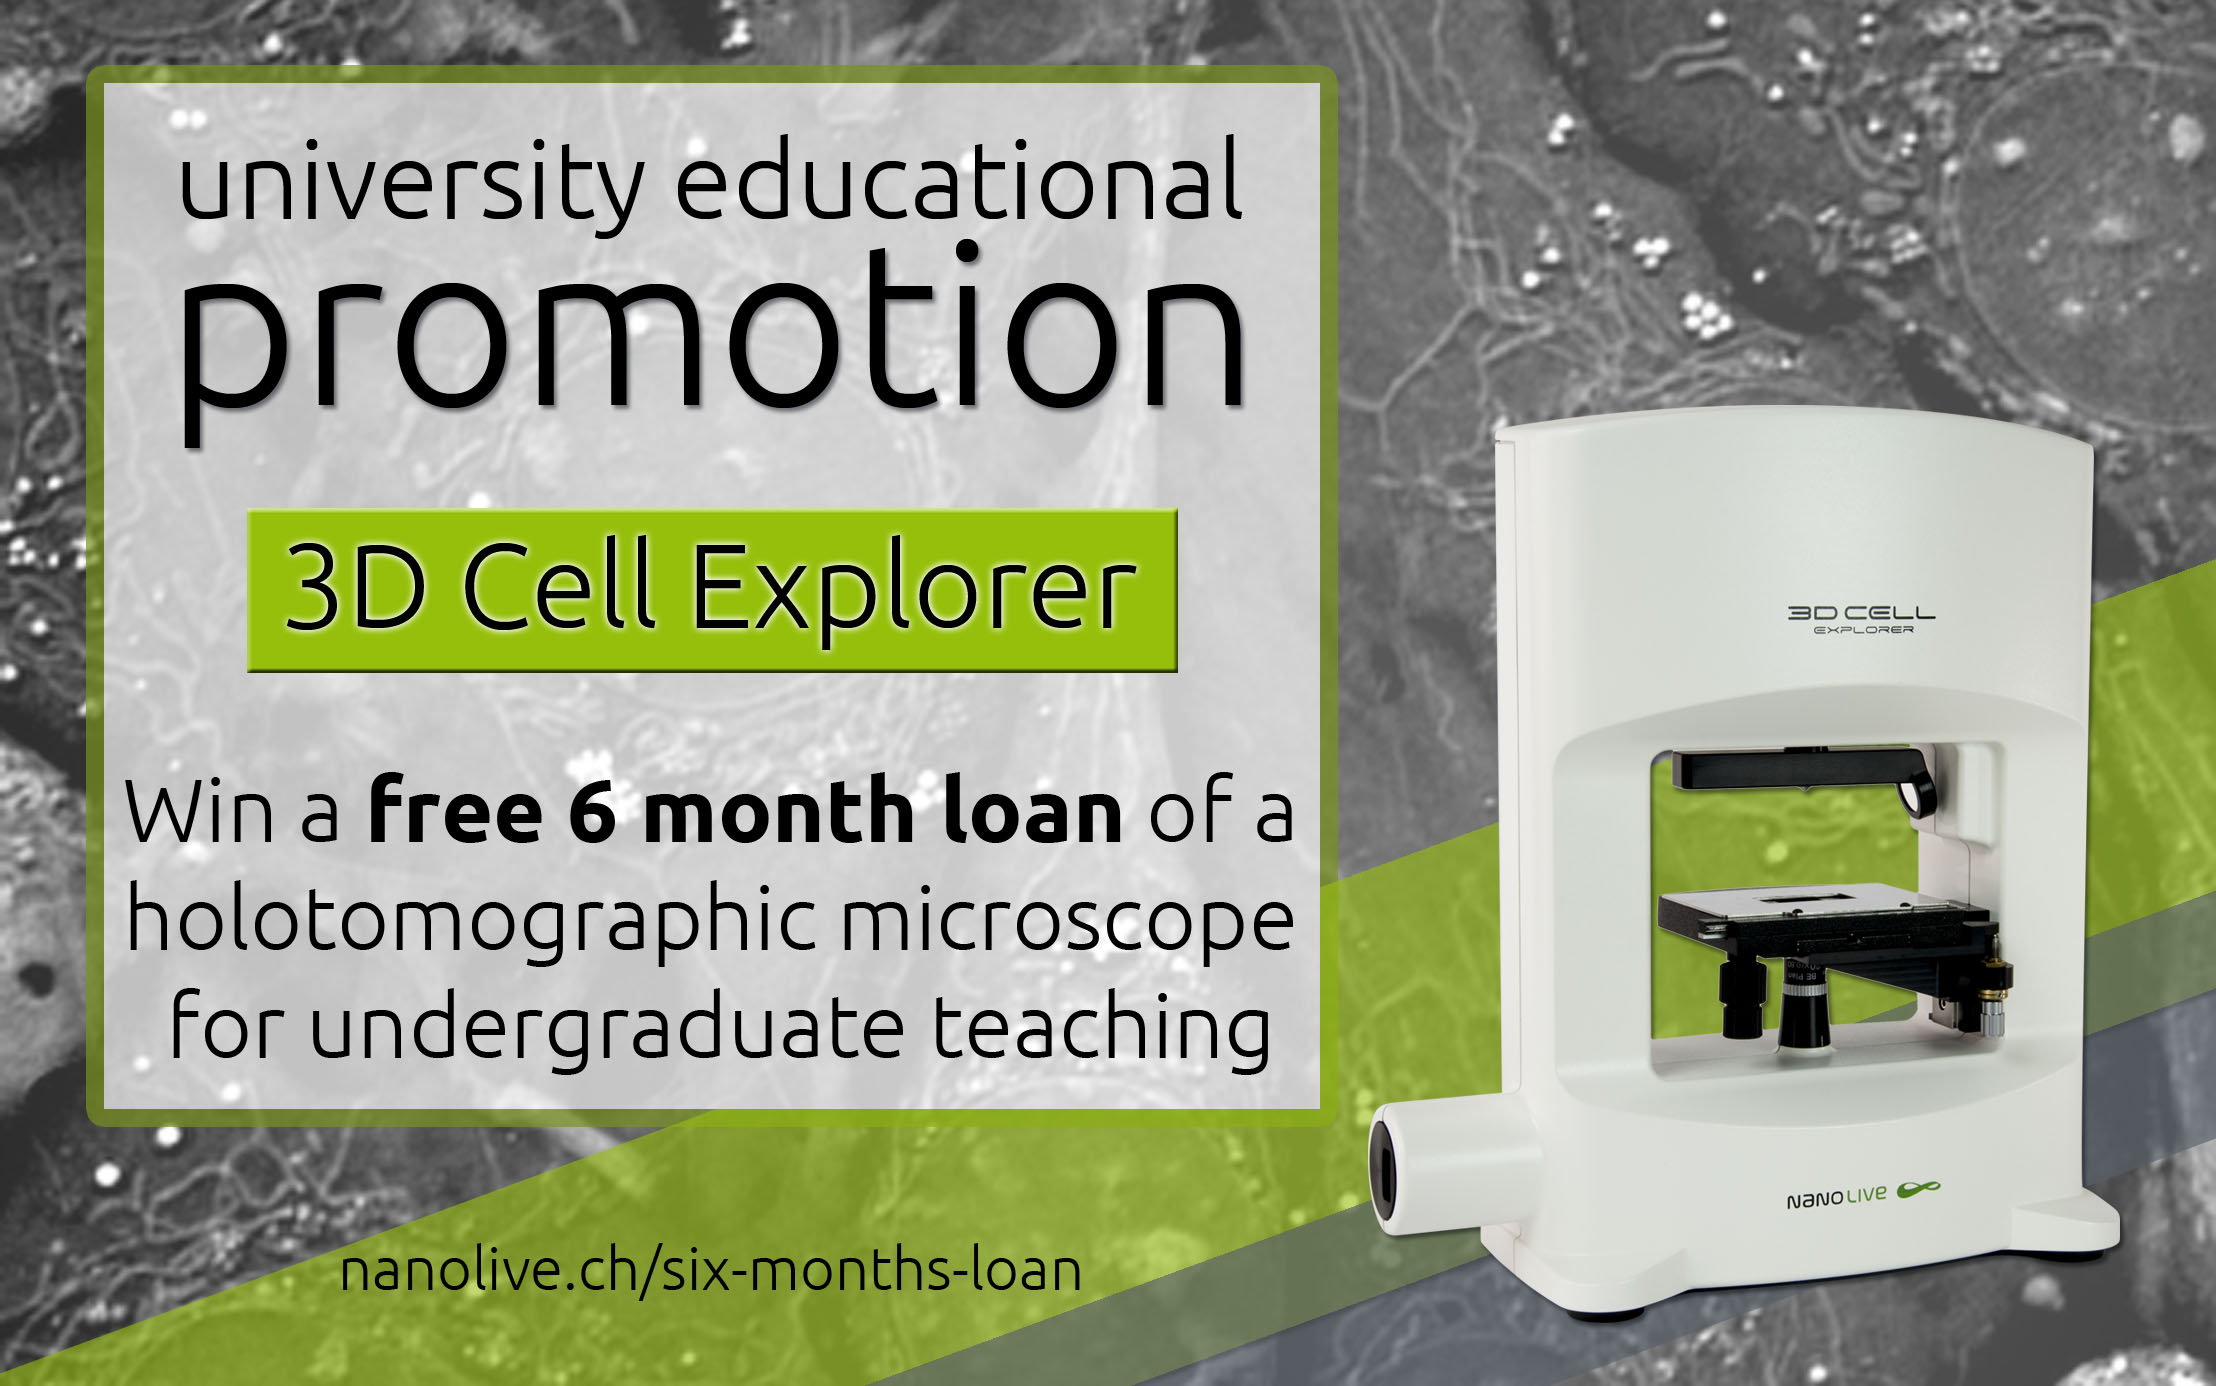 6 months free loan of the 3D Cell Explorer - university educational promotion